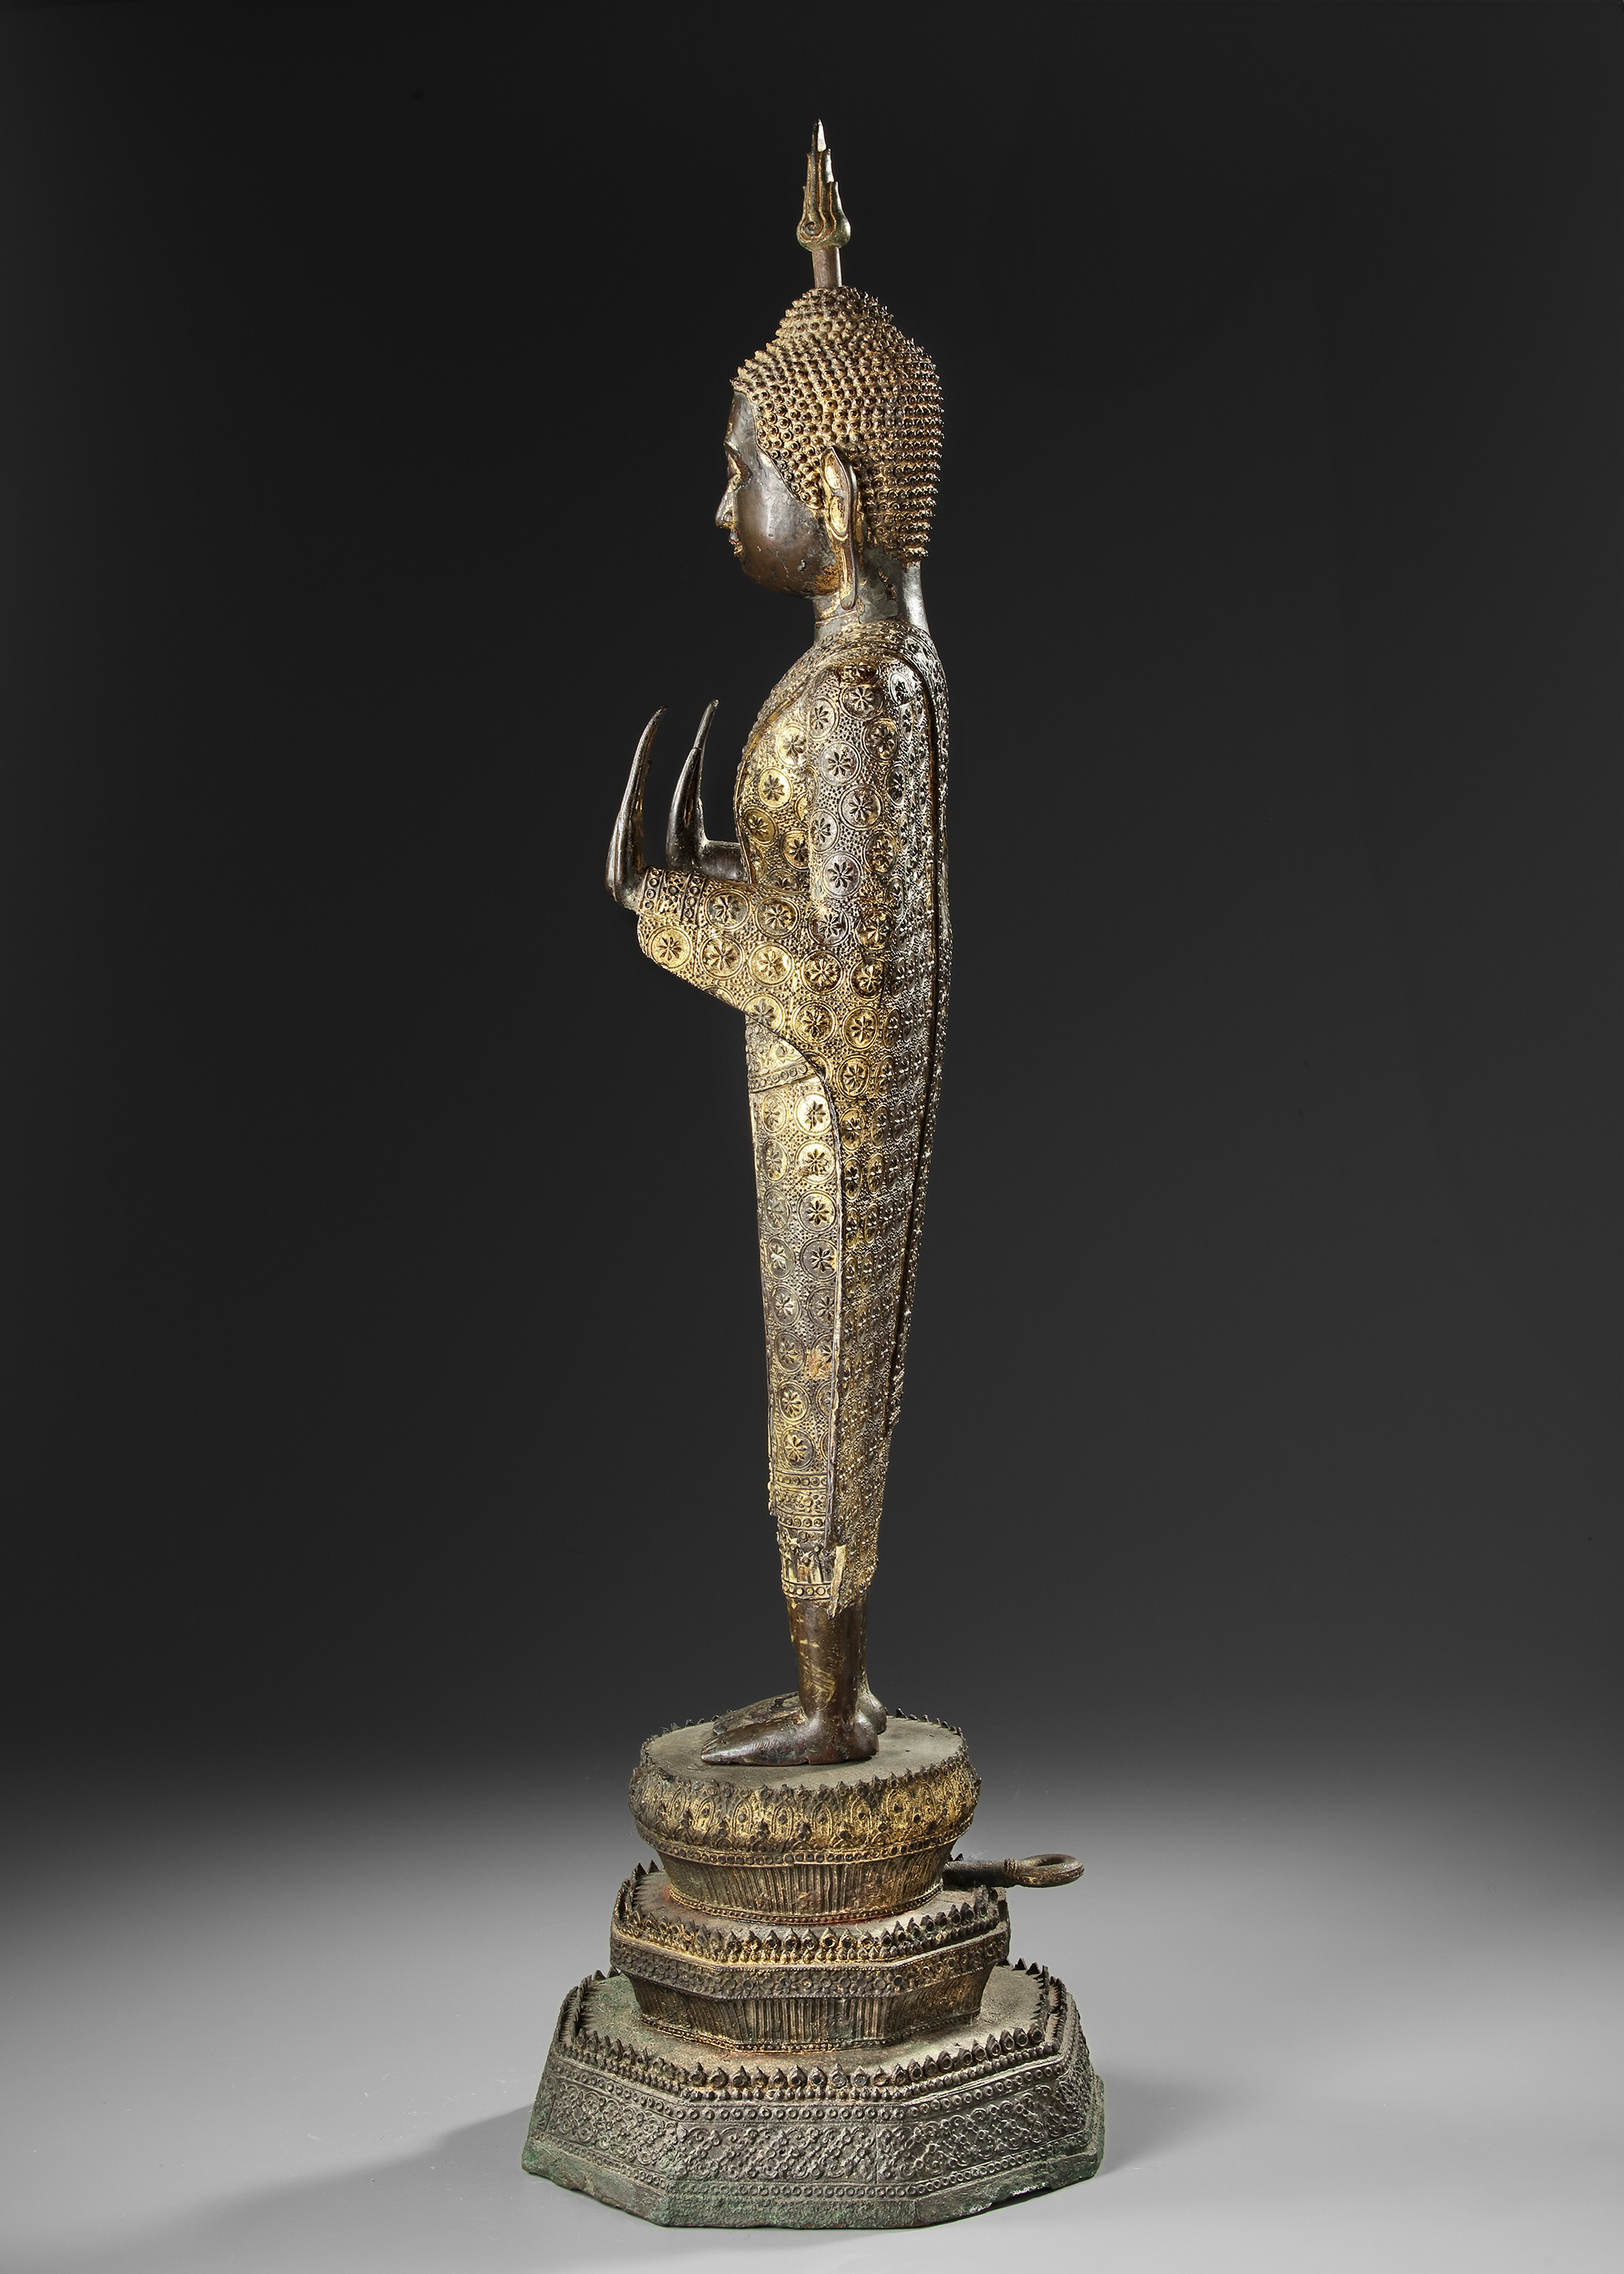 A GILT BRONZE STANDING FIGURE OF A BUDDHA, LATE 19TH CENTURY - Image 3 of 5